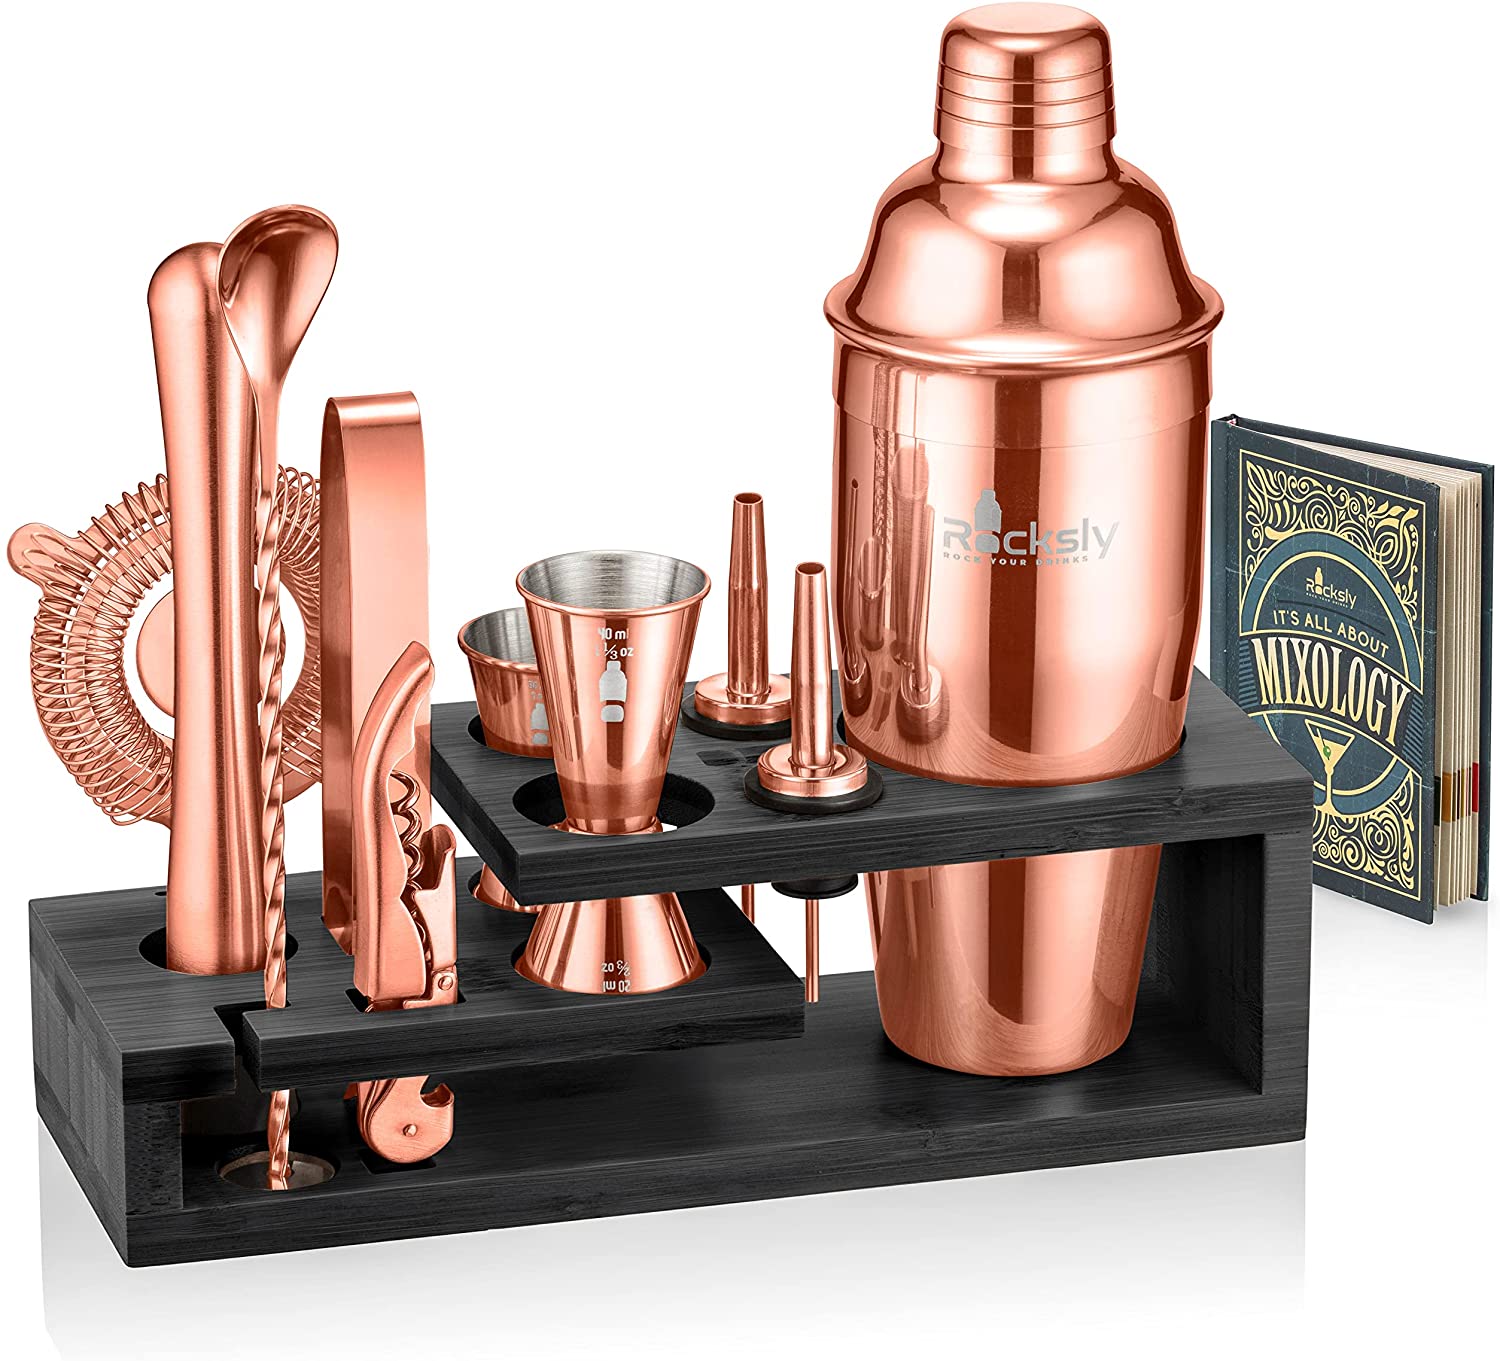 Set Cocktails Drinks Negroni Alcohol NEW Copper Old Fashioned Bar Kit 